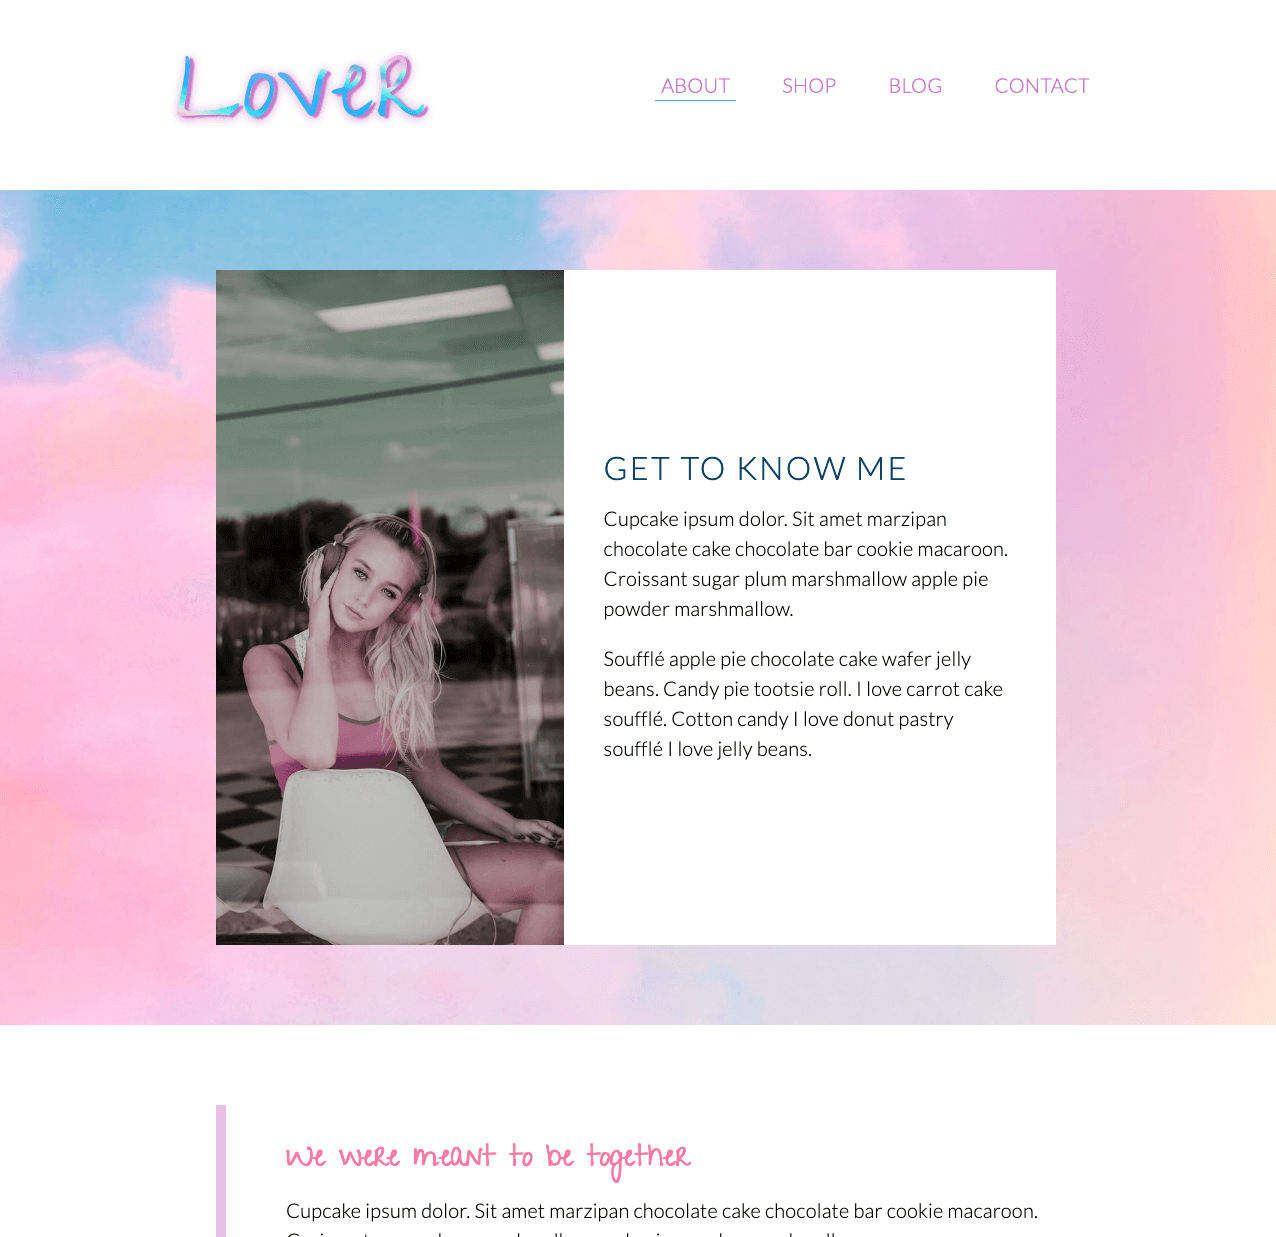 lover-about